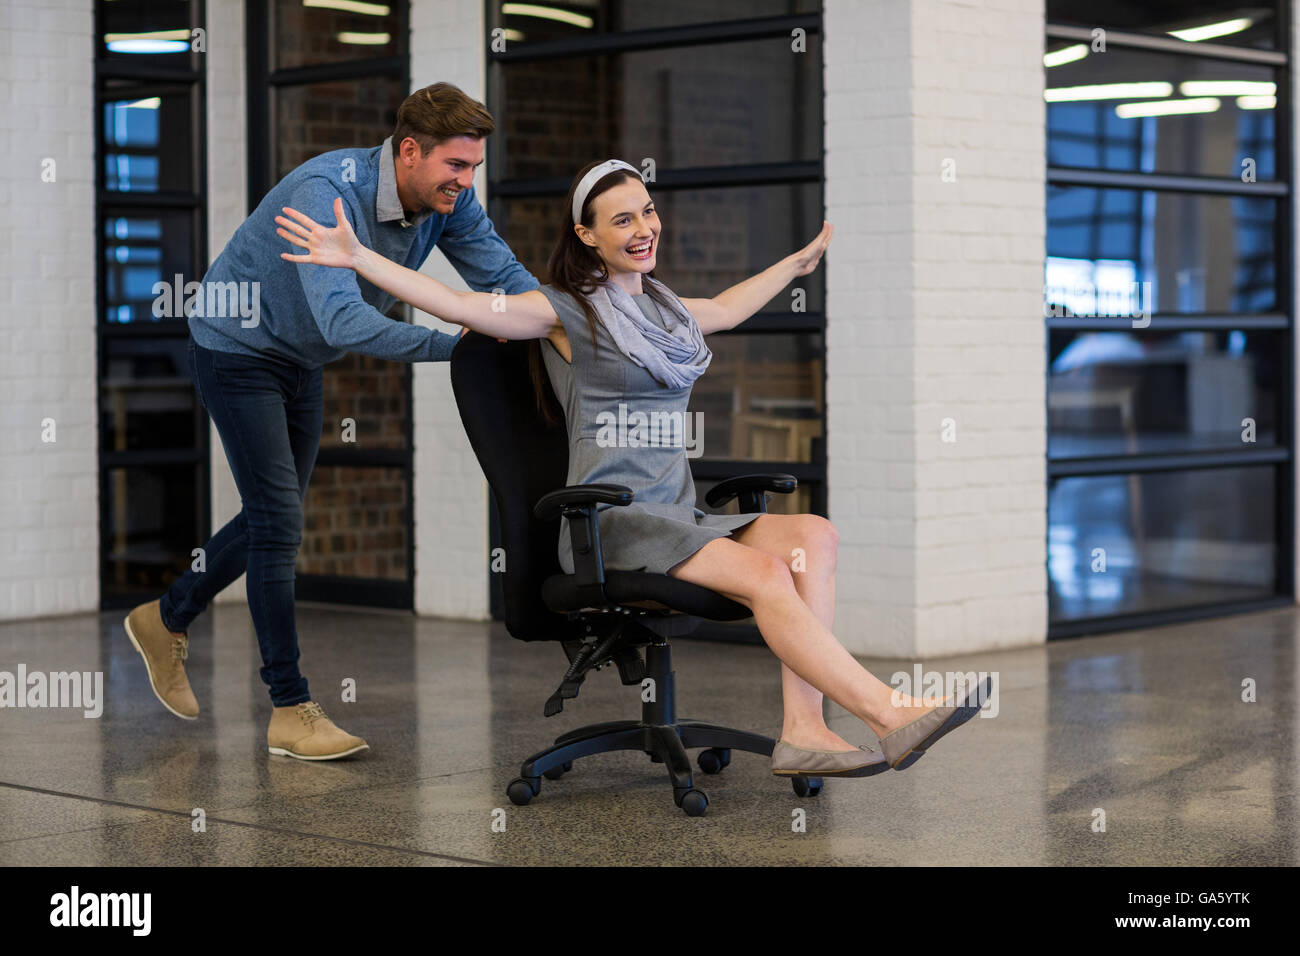 Playful colleagues in creative office Stock Photo